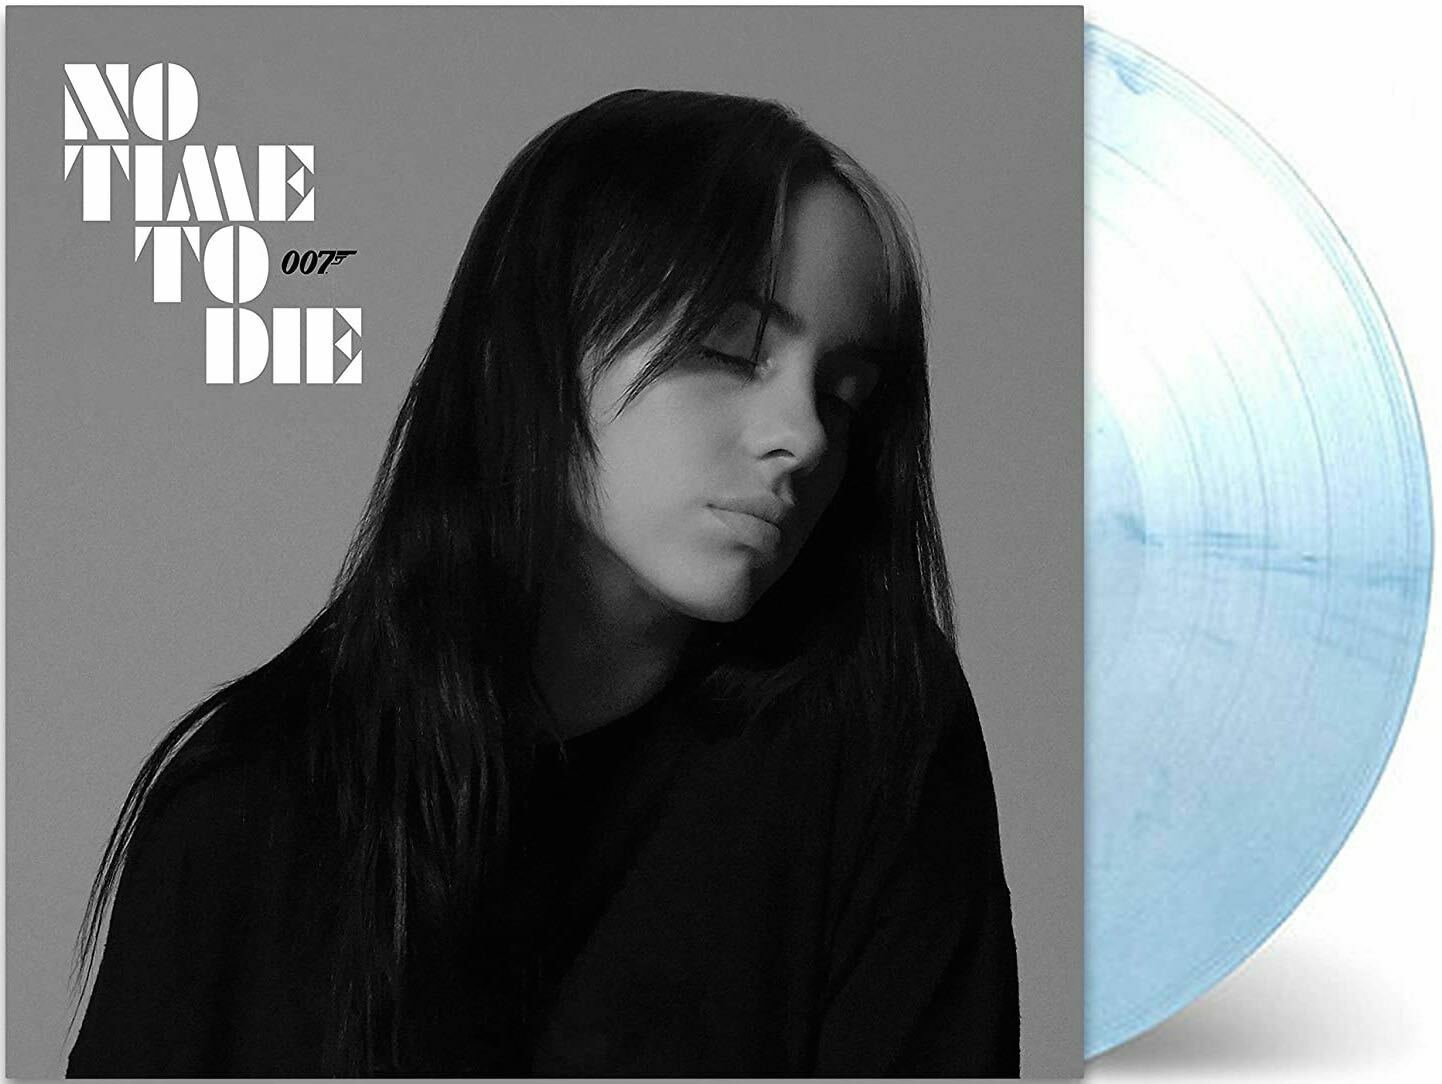 Billie Eilish, No Time To Die (Ice Color) [Import] (Limited Edit